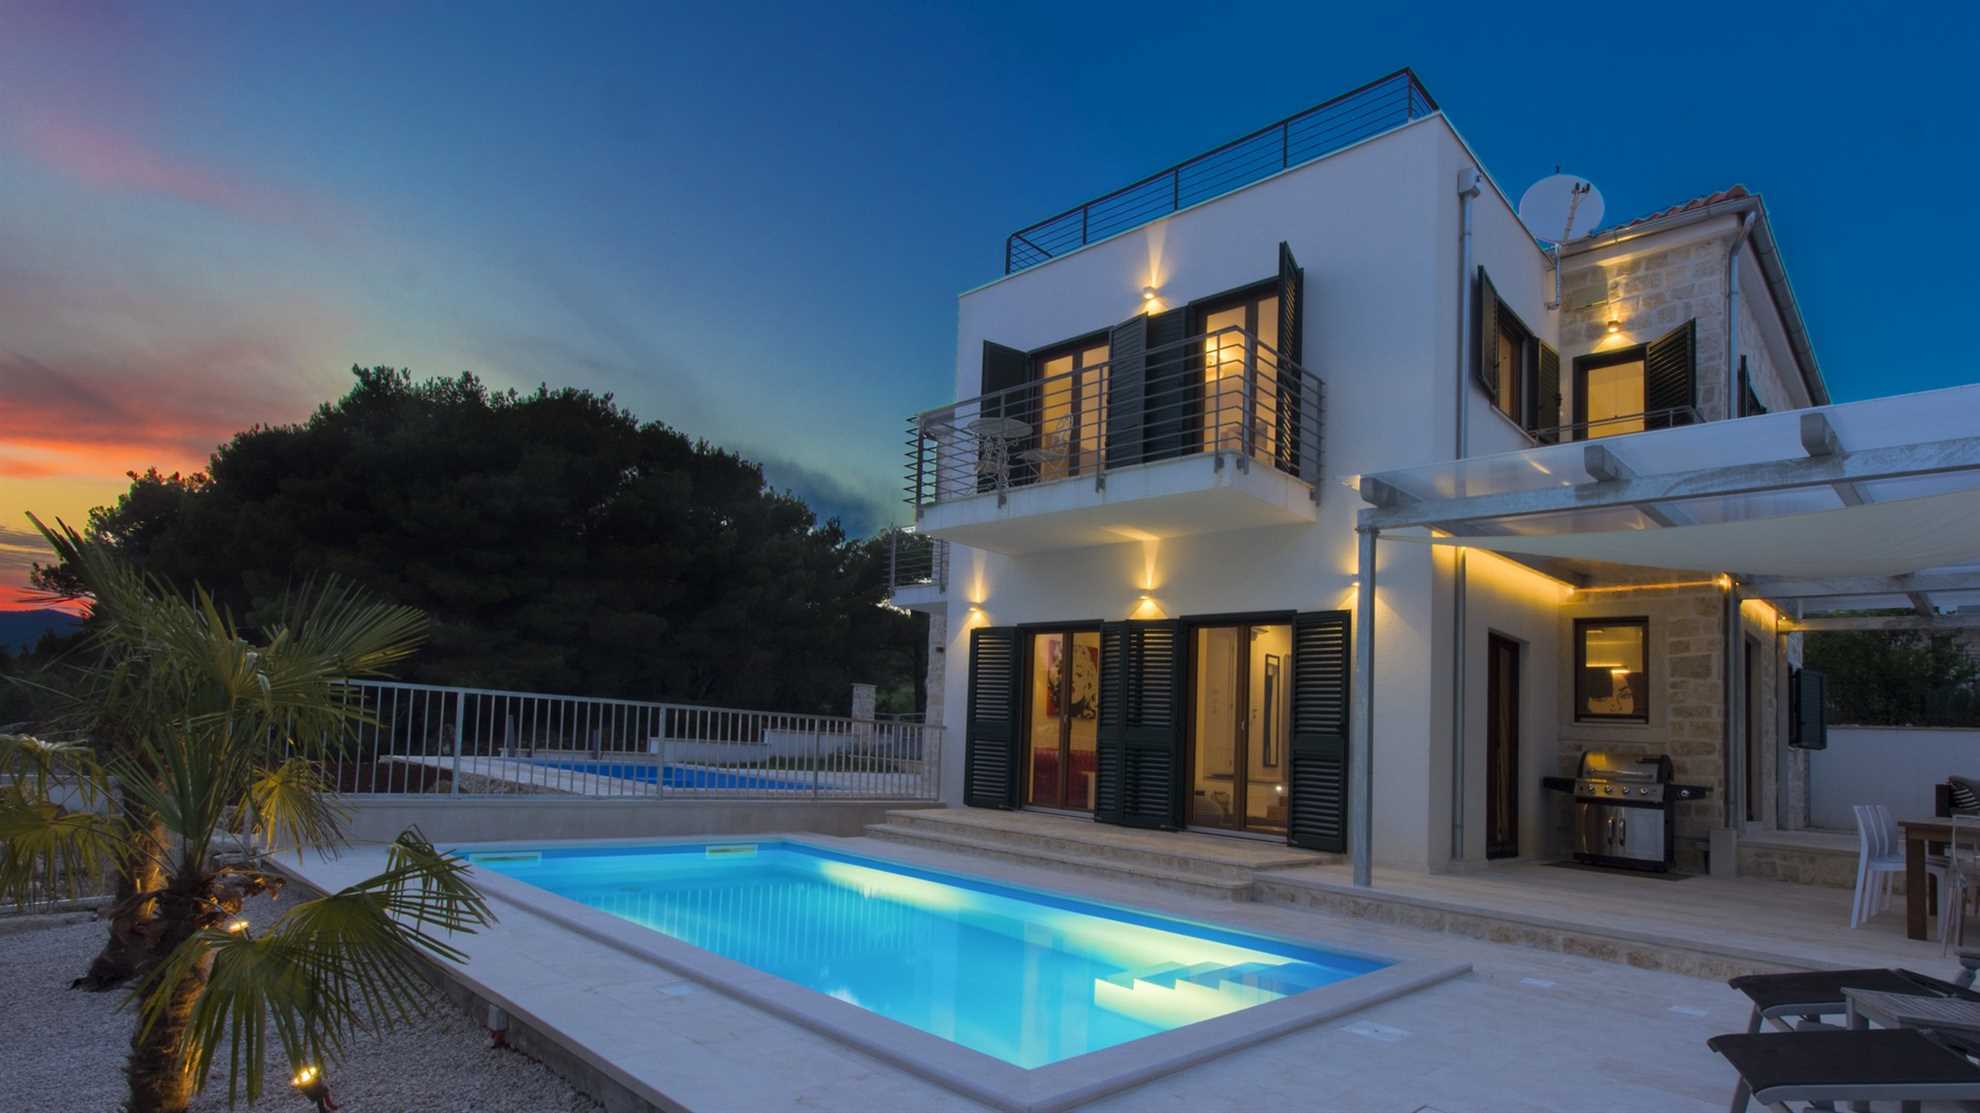 Villa SUNCE - modern house with pool and roof terrace, 500 m to the beach, free WIFI & parking